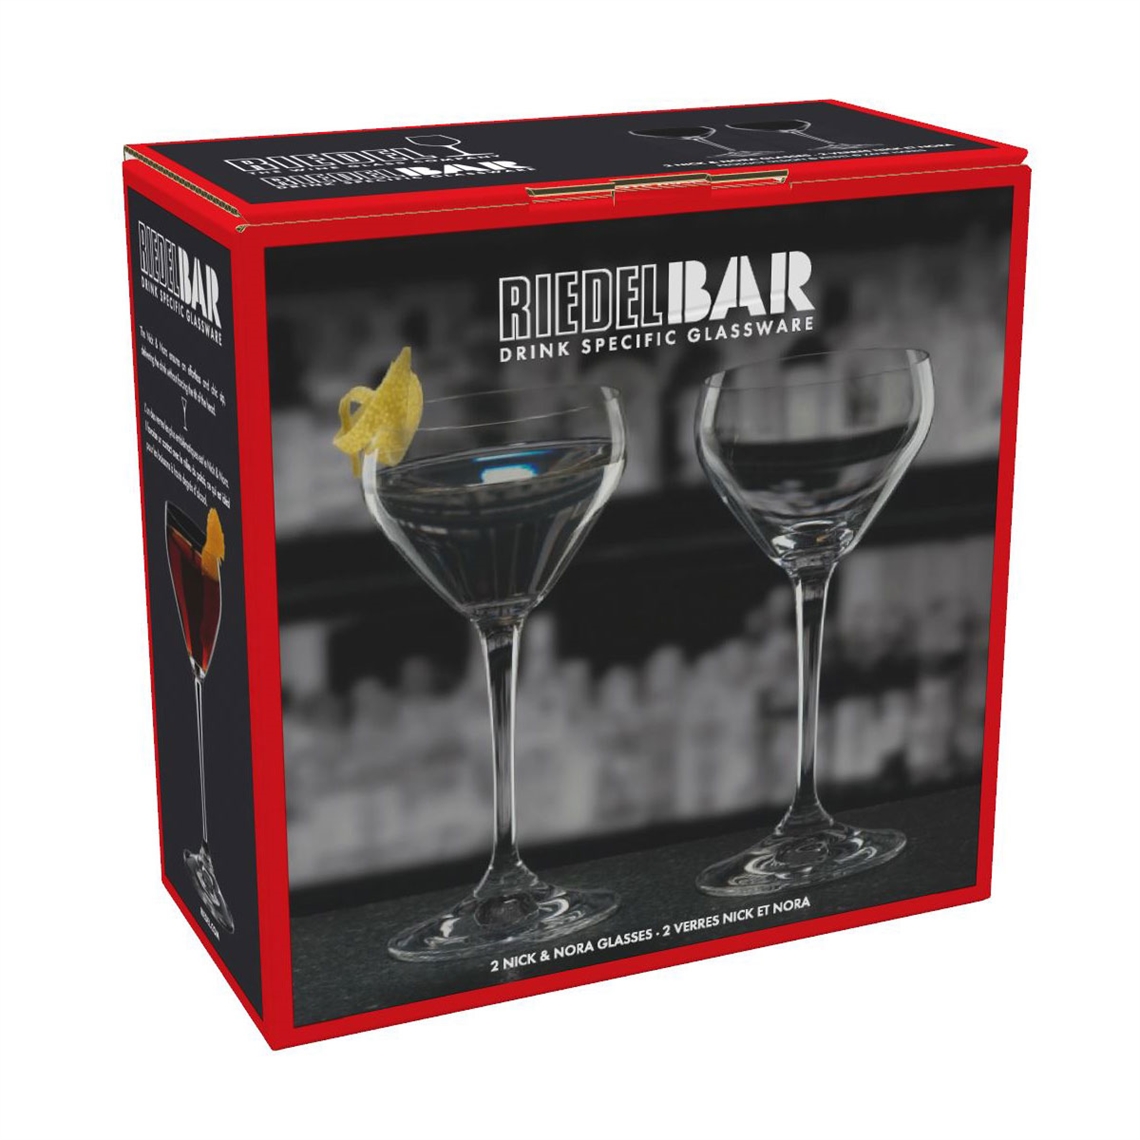 Riedel Bar Drink Specific Nick & Nora Glass - Set of 2 - 6417/05